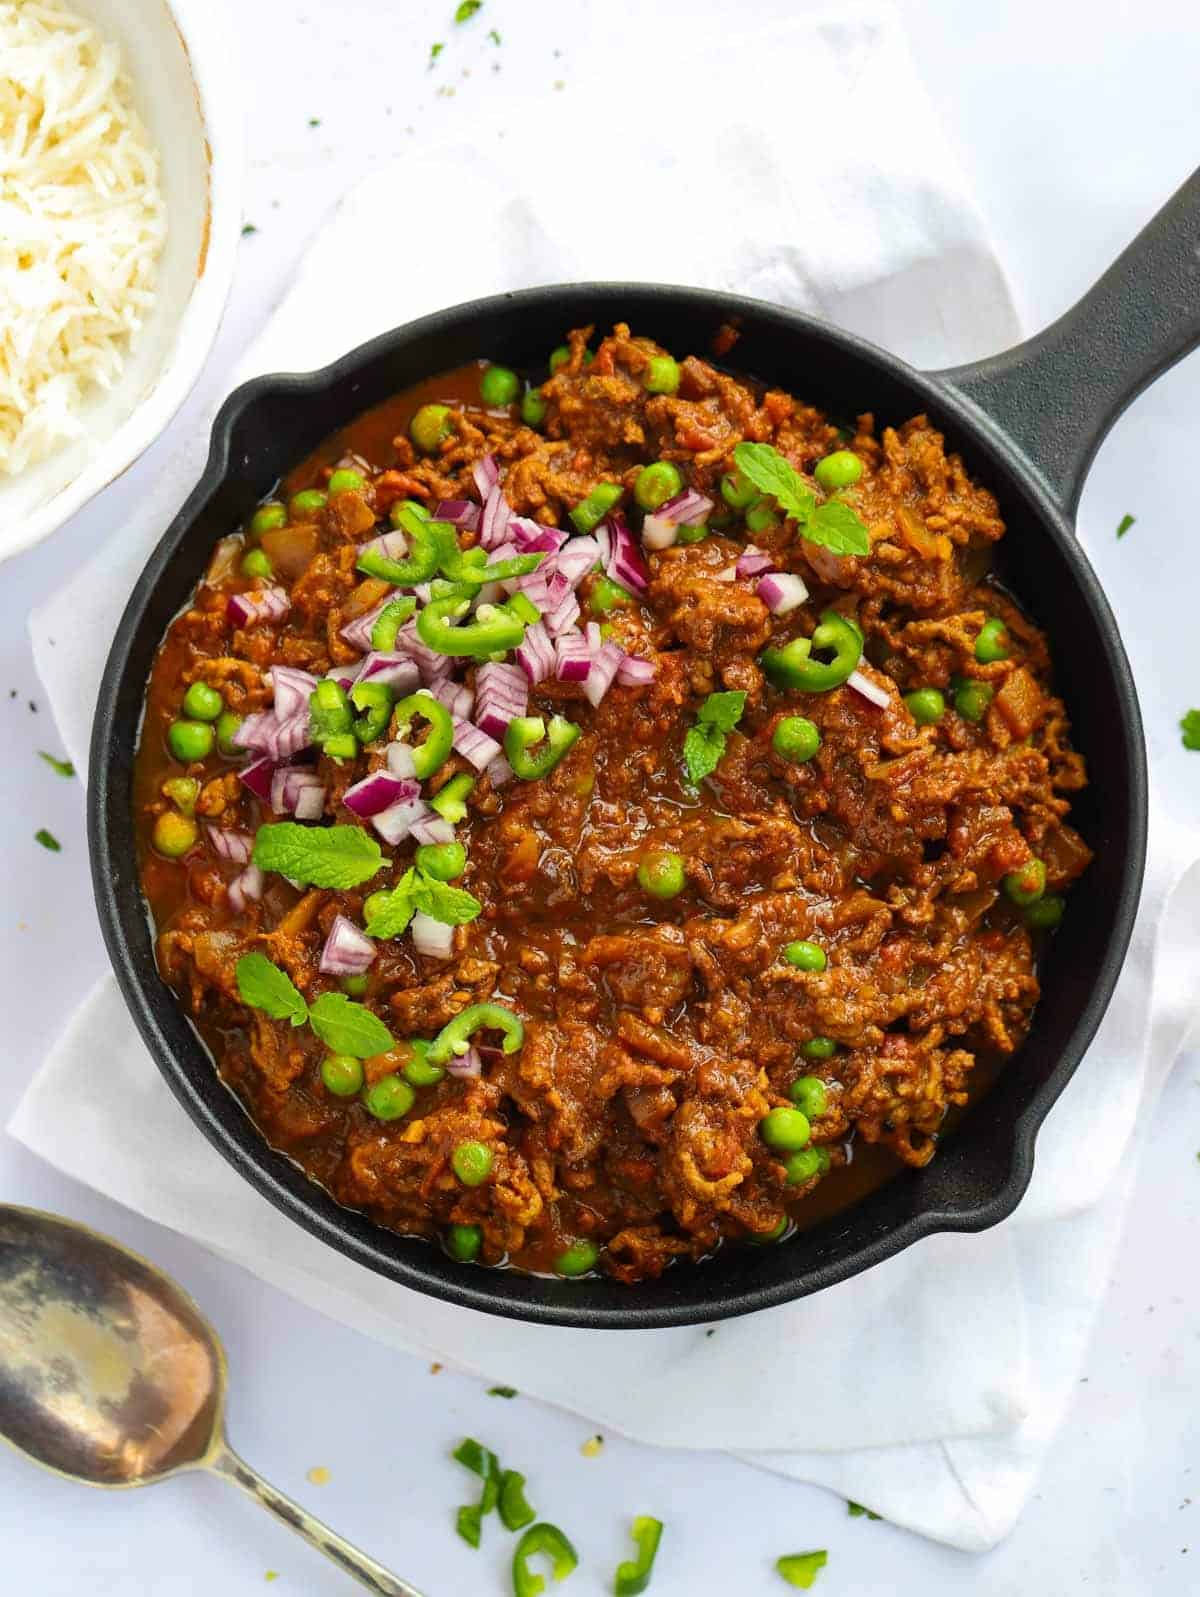 Discover Delightful Recipes for Curried Mince!